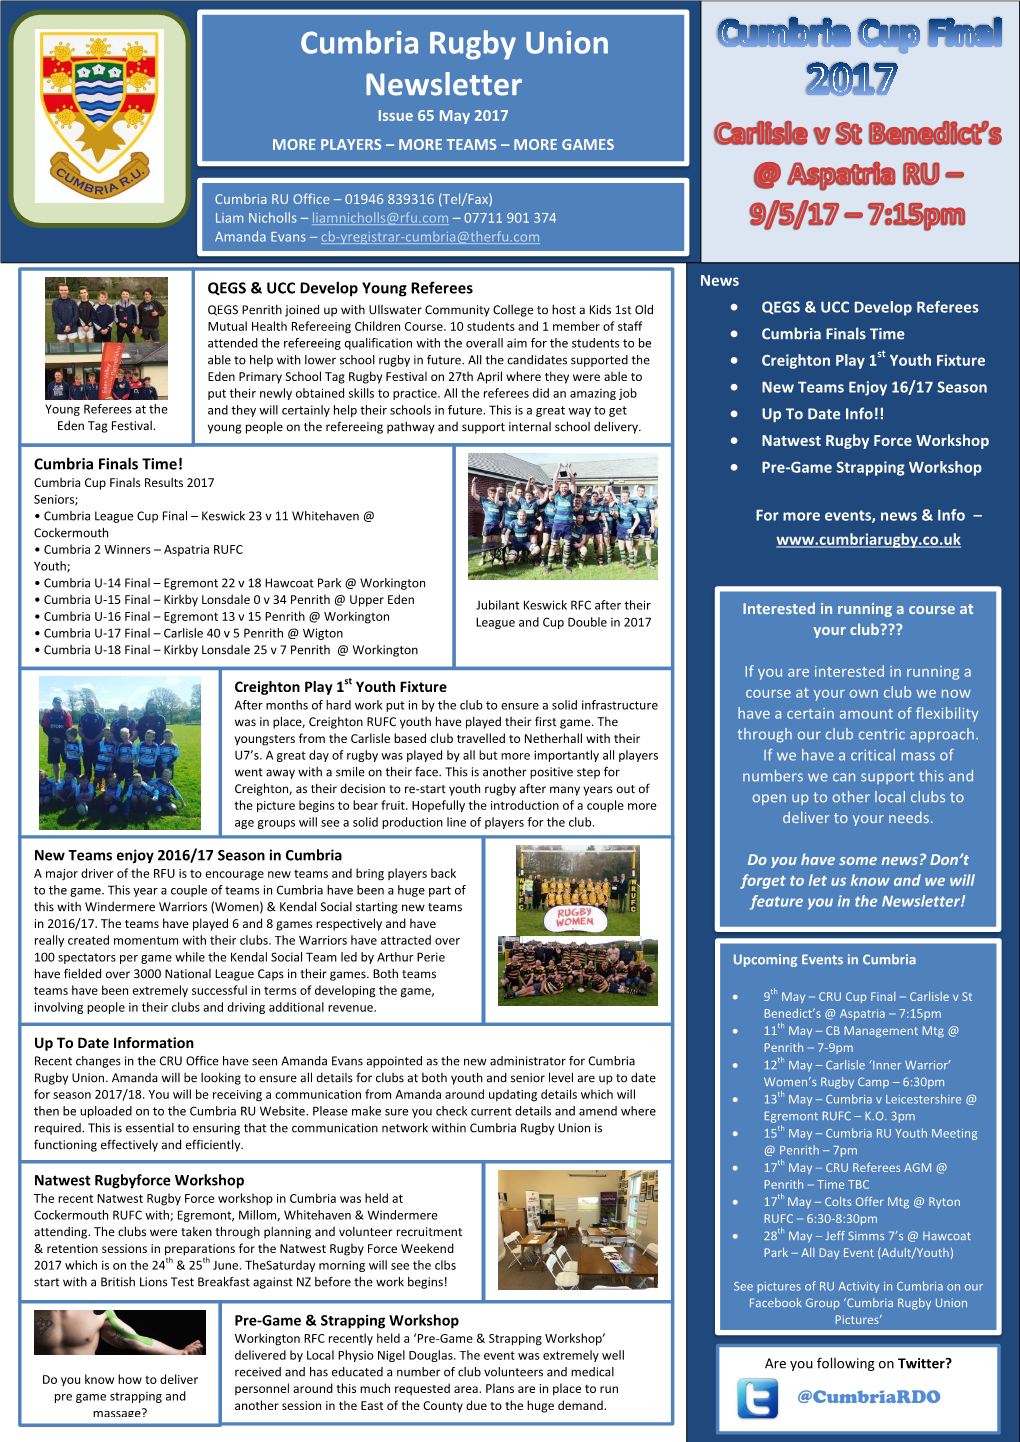 Cumbria Rugby Union Newsletter